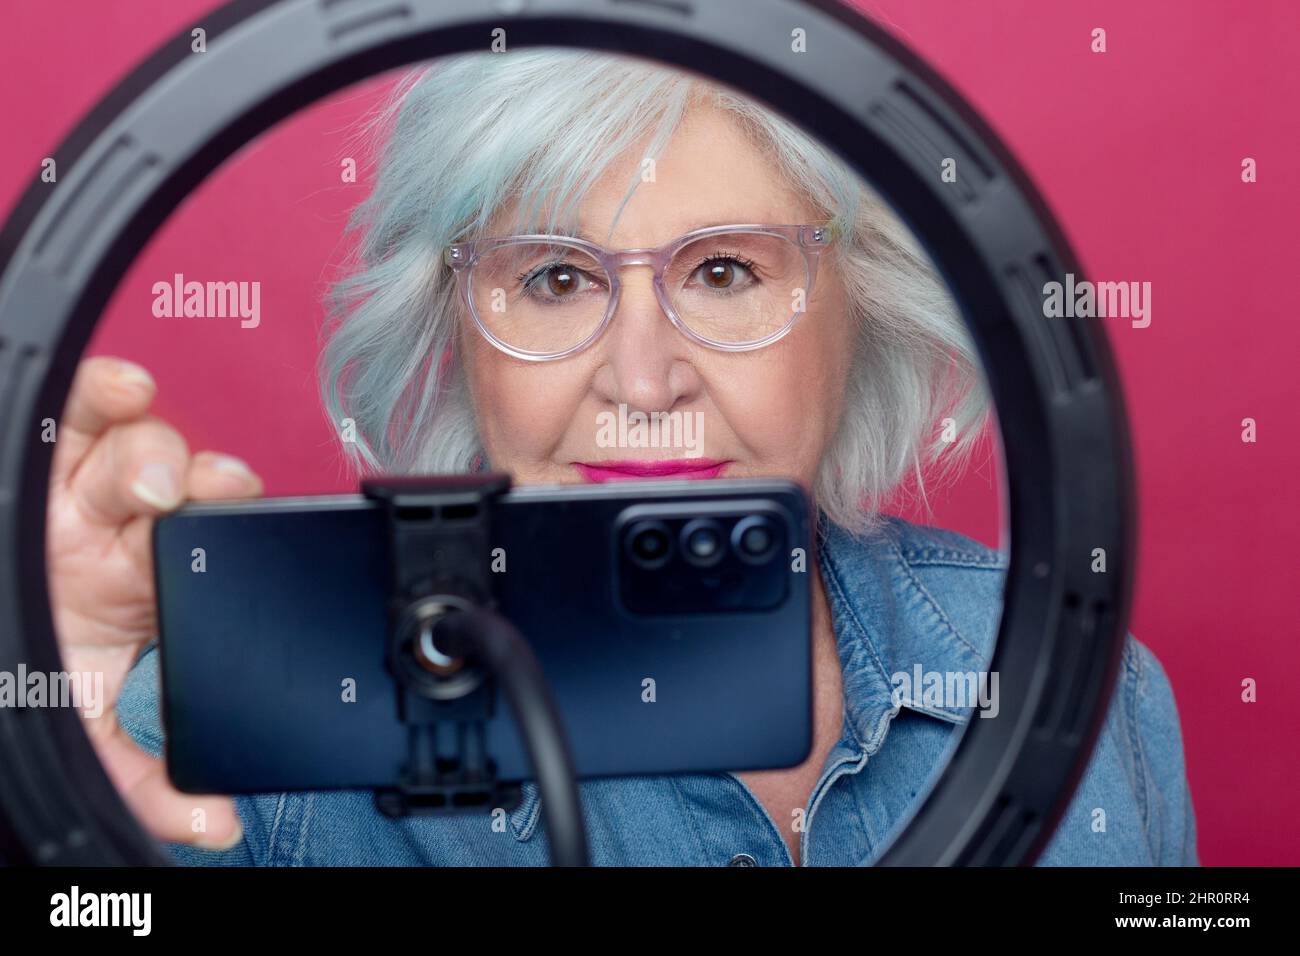 portrait of an older woman with make-up behind a light ring turning on a cell phone to record on pink background Stock Photo